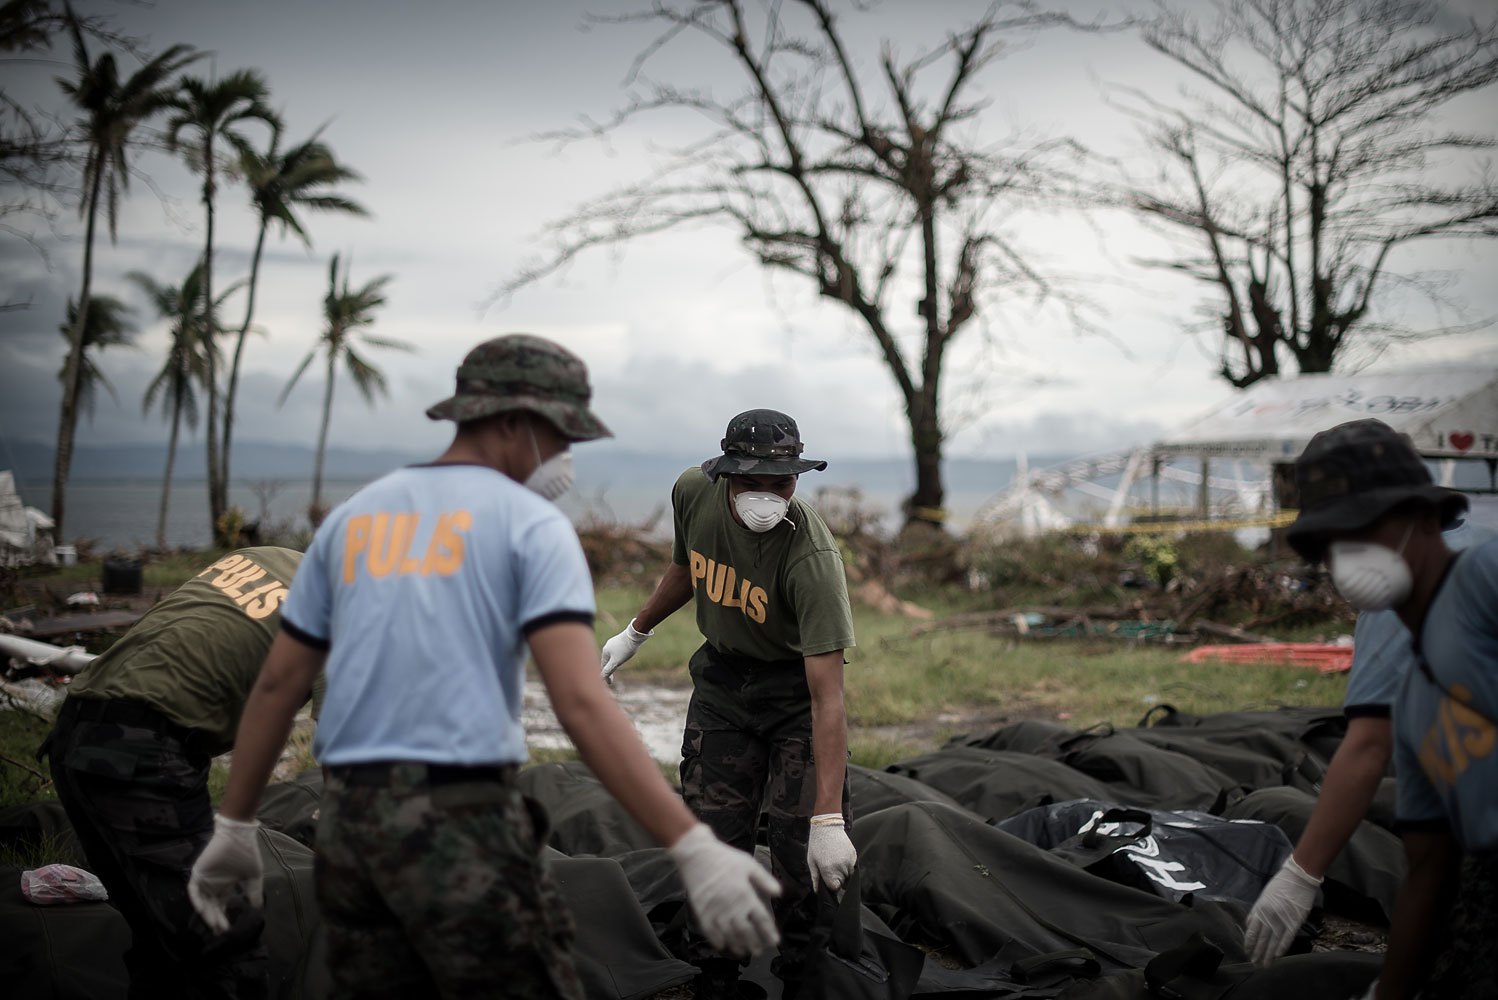 Dead bodies are unloaded at a makeshift morgue in Tacloban, on the eastern island of Leyte on November 12, 2013 after Super Typhoon Haiyan swept over the Philippines.